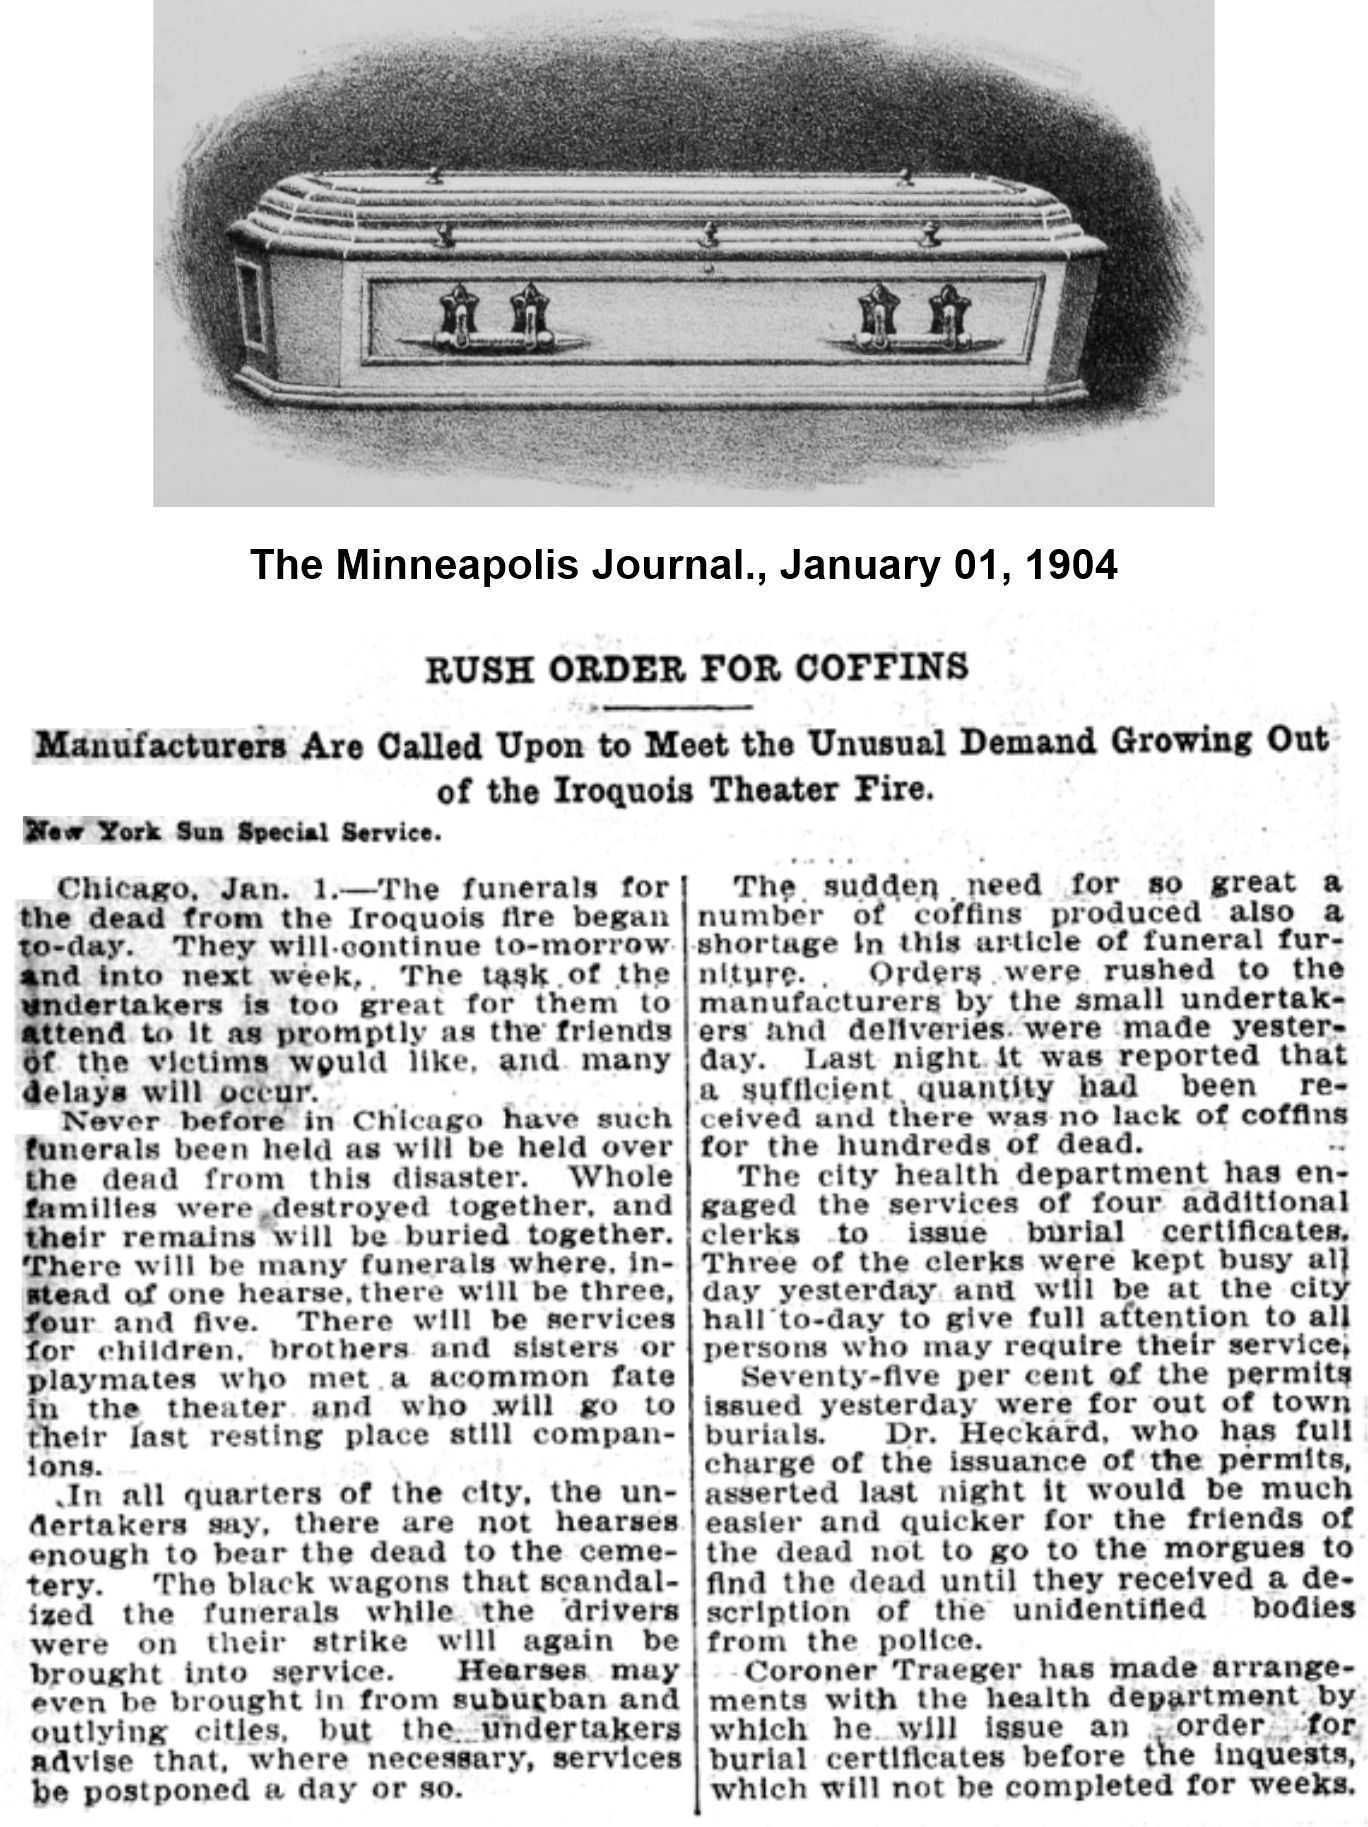 News story about coffins, hearses and burial permits for Irquois Theater victims